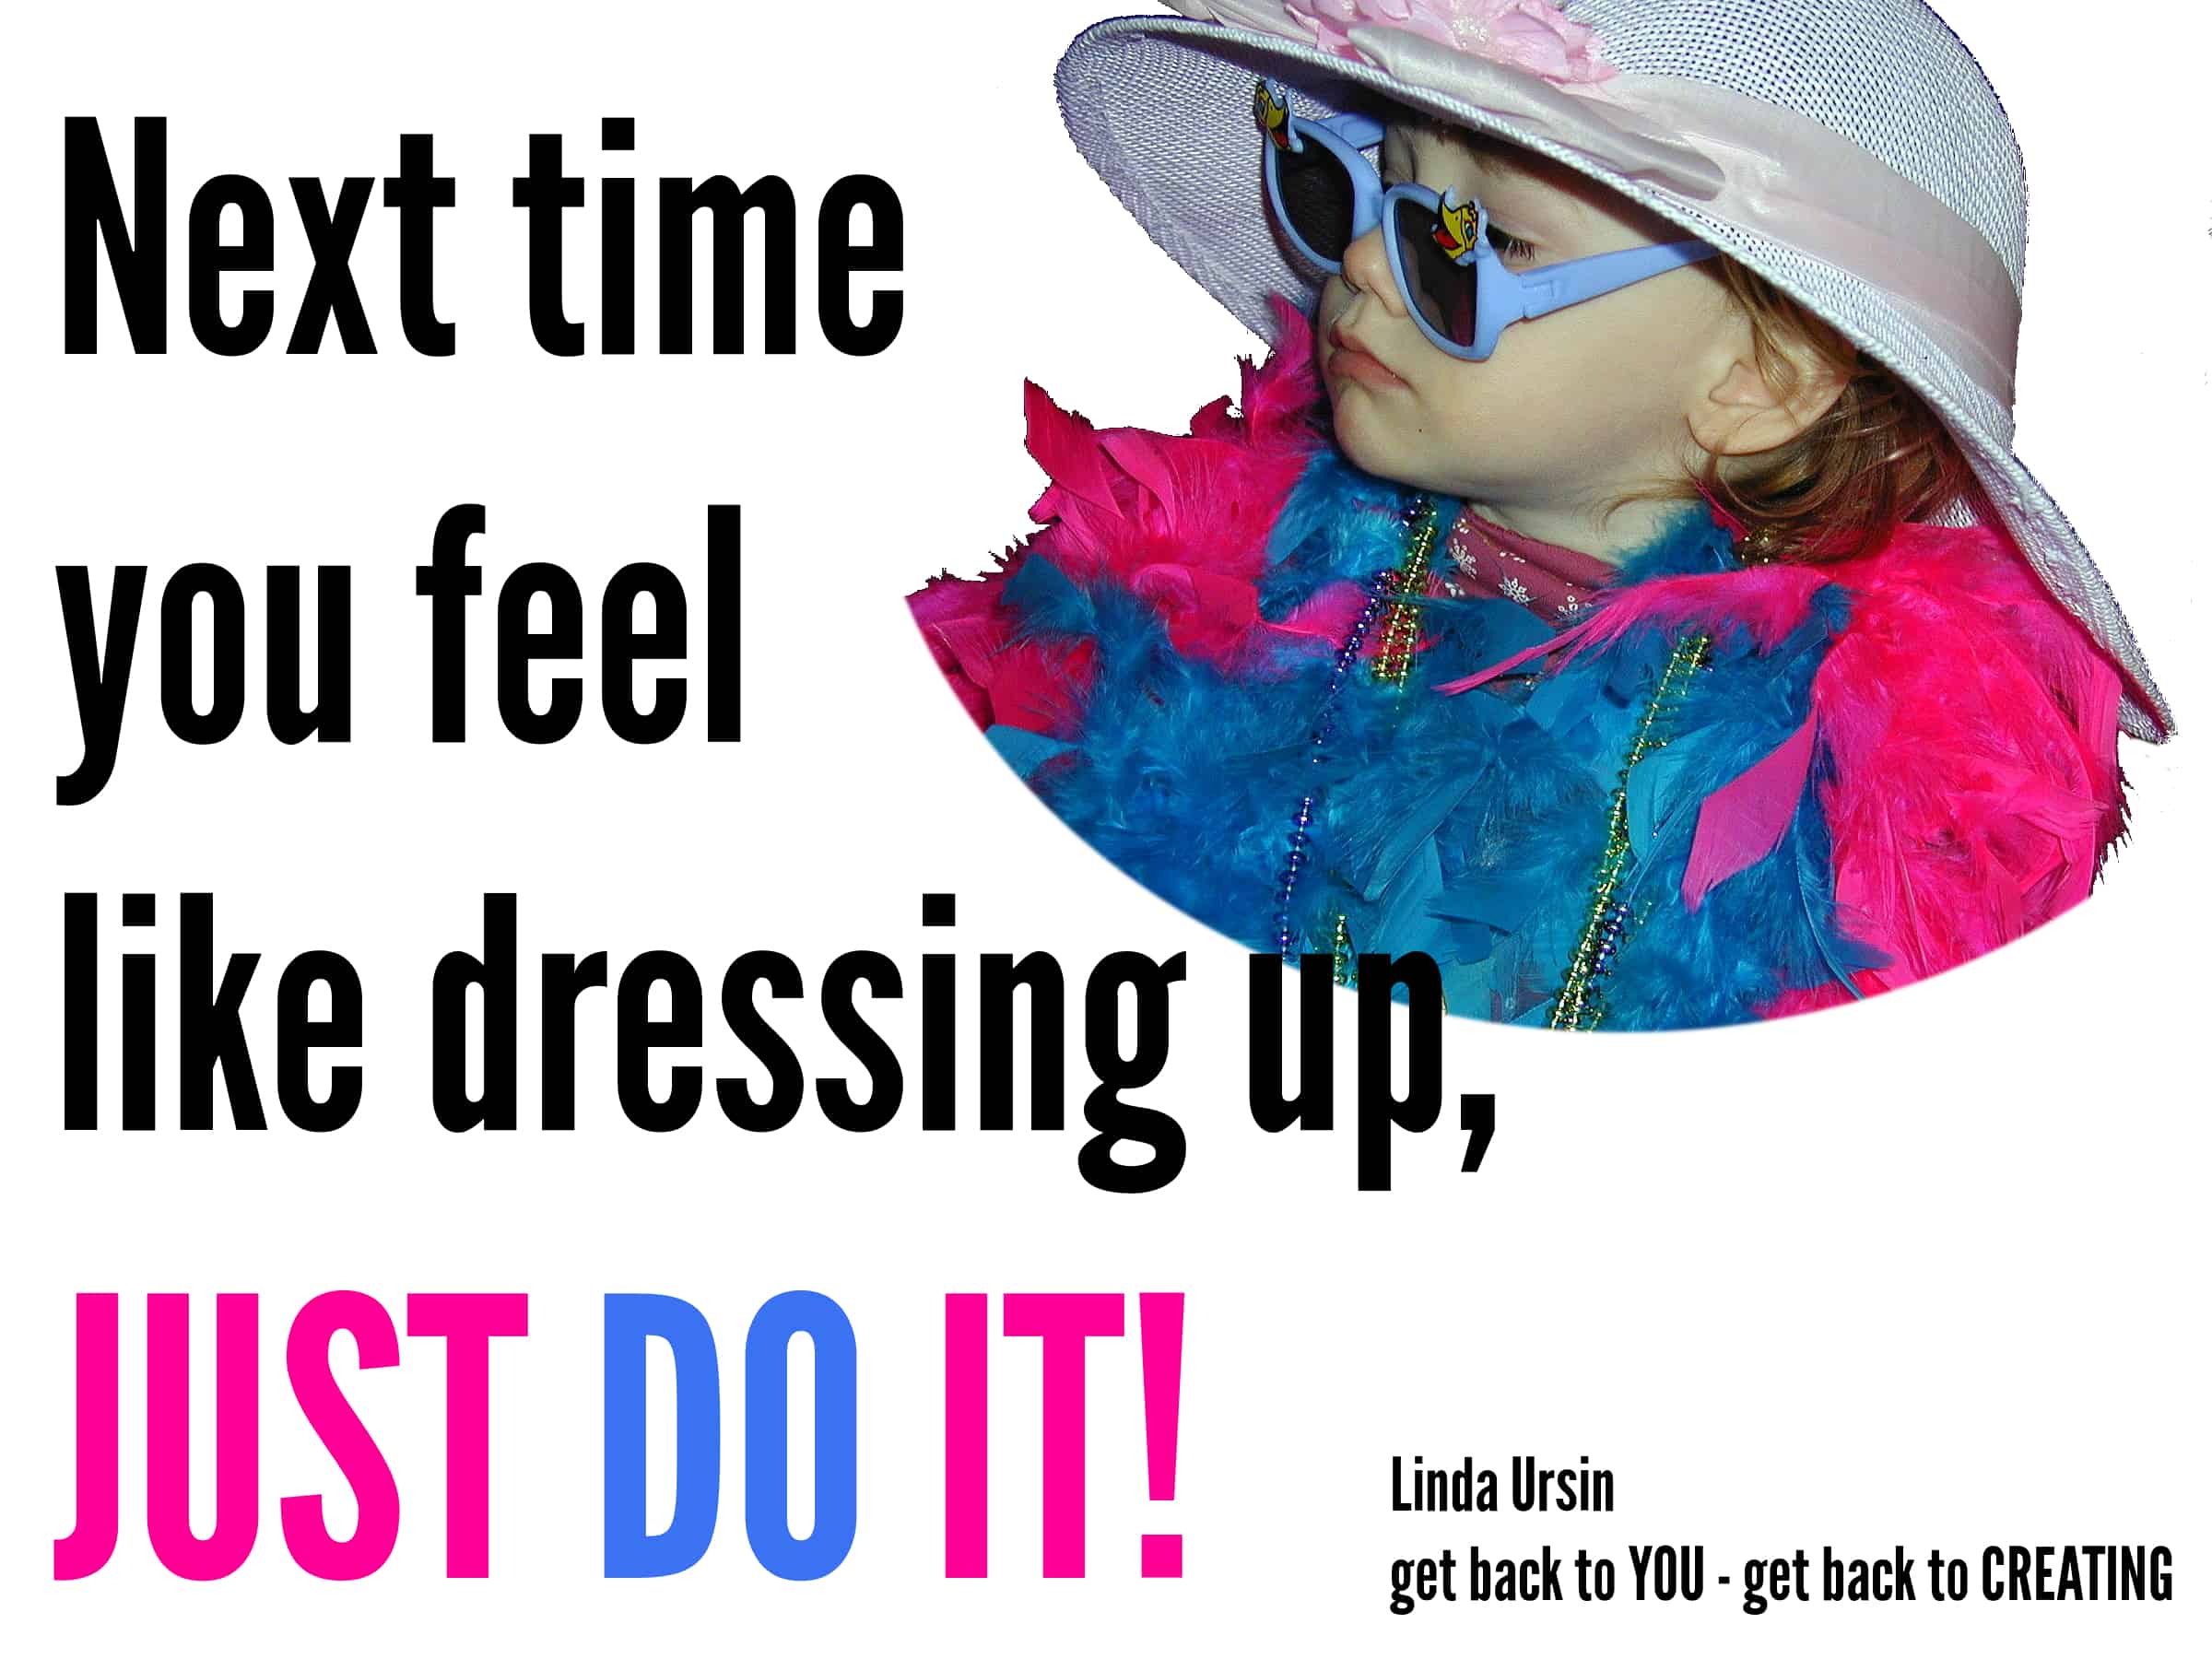 Next time you feel like dressing up, just do it!